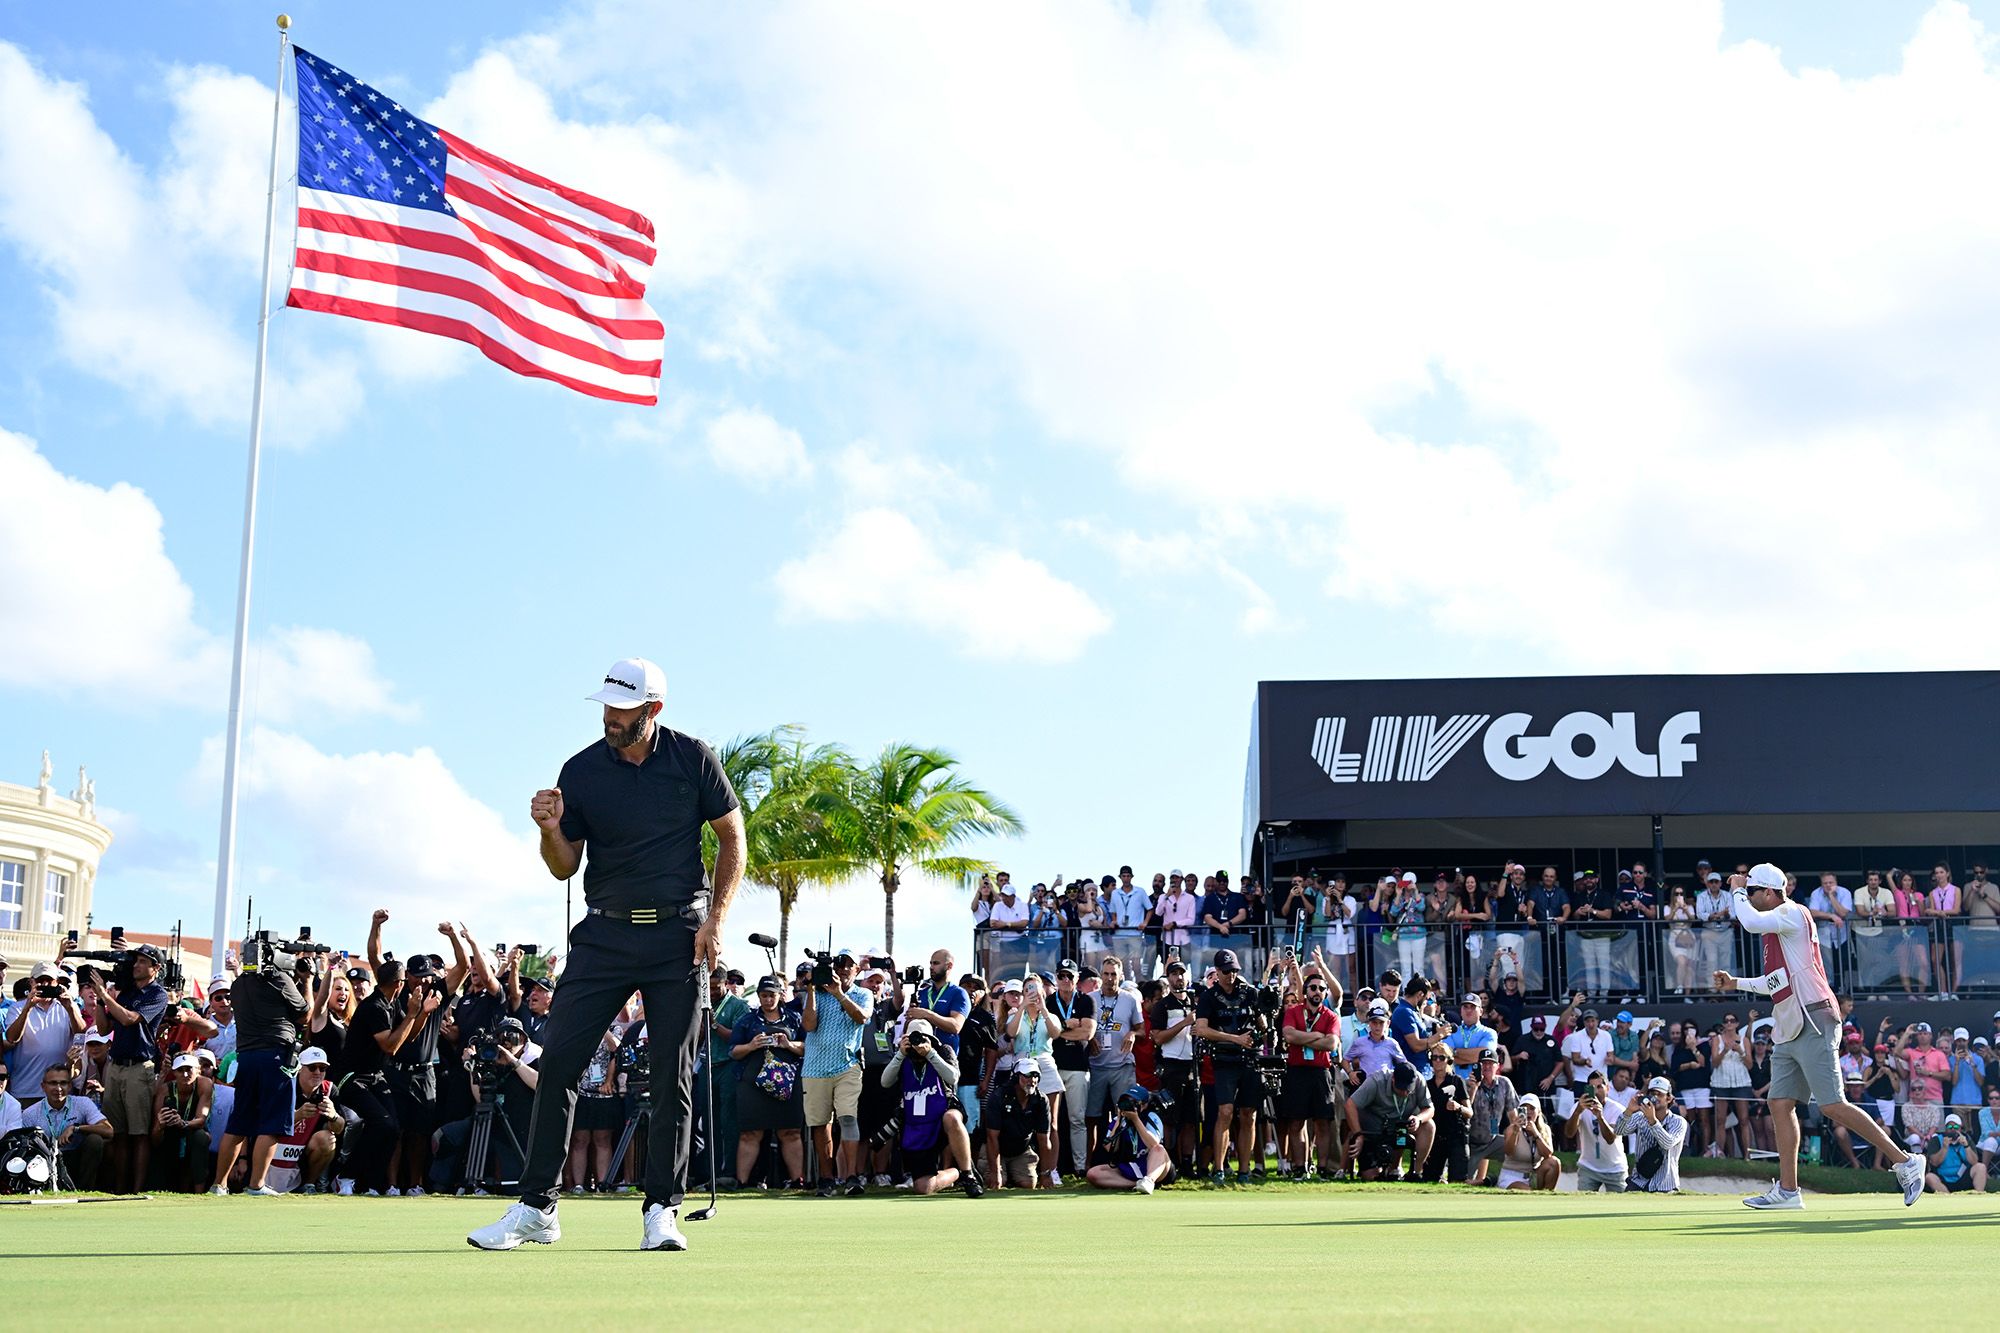 PGA TOUR launches new campaign in support of Responsible Gaming